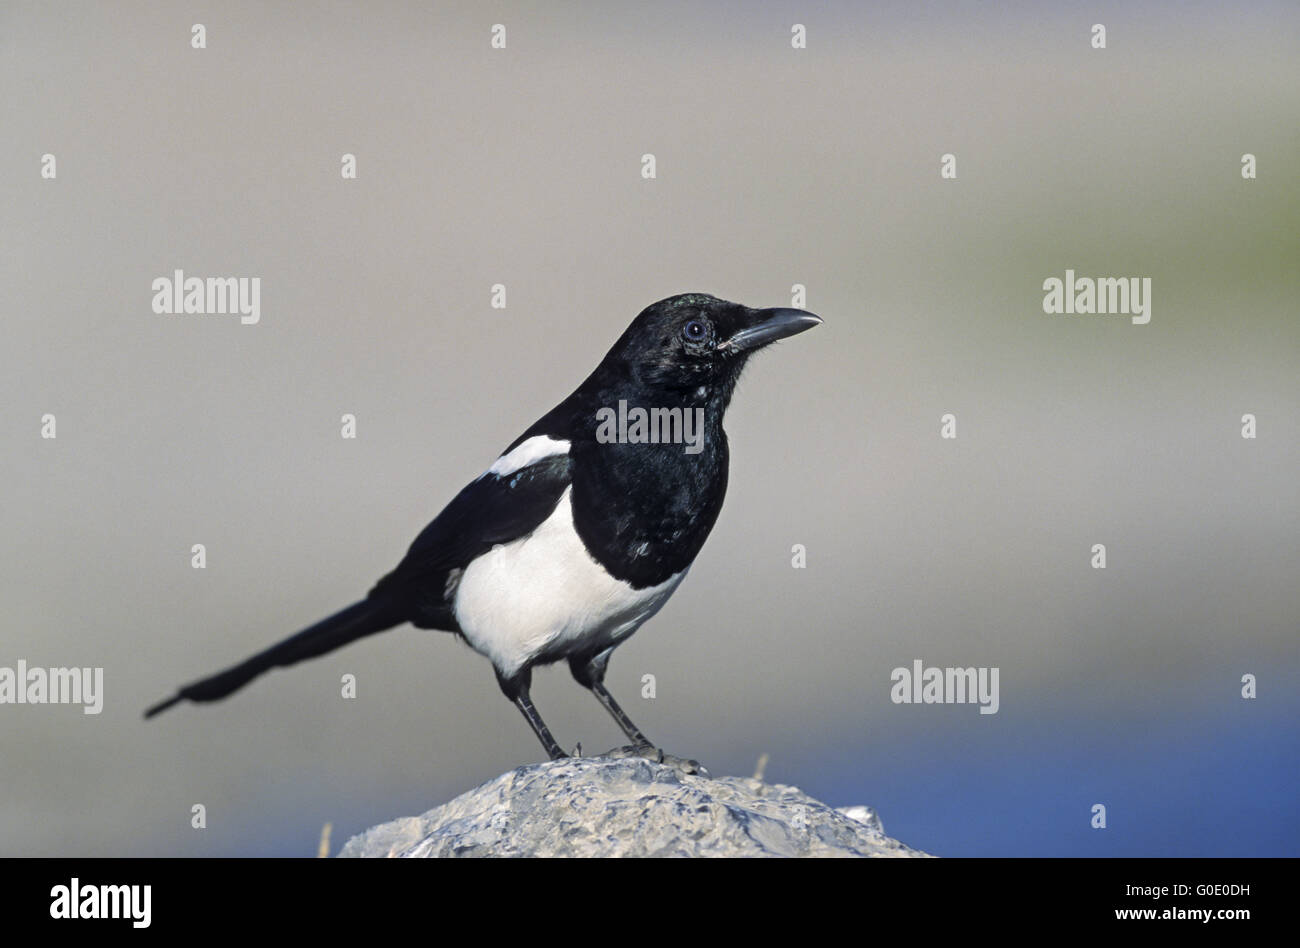 European Magpie rests on a boulder at lakeshore Stock Photo